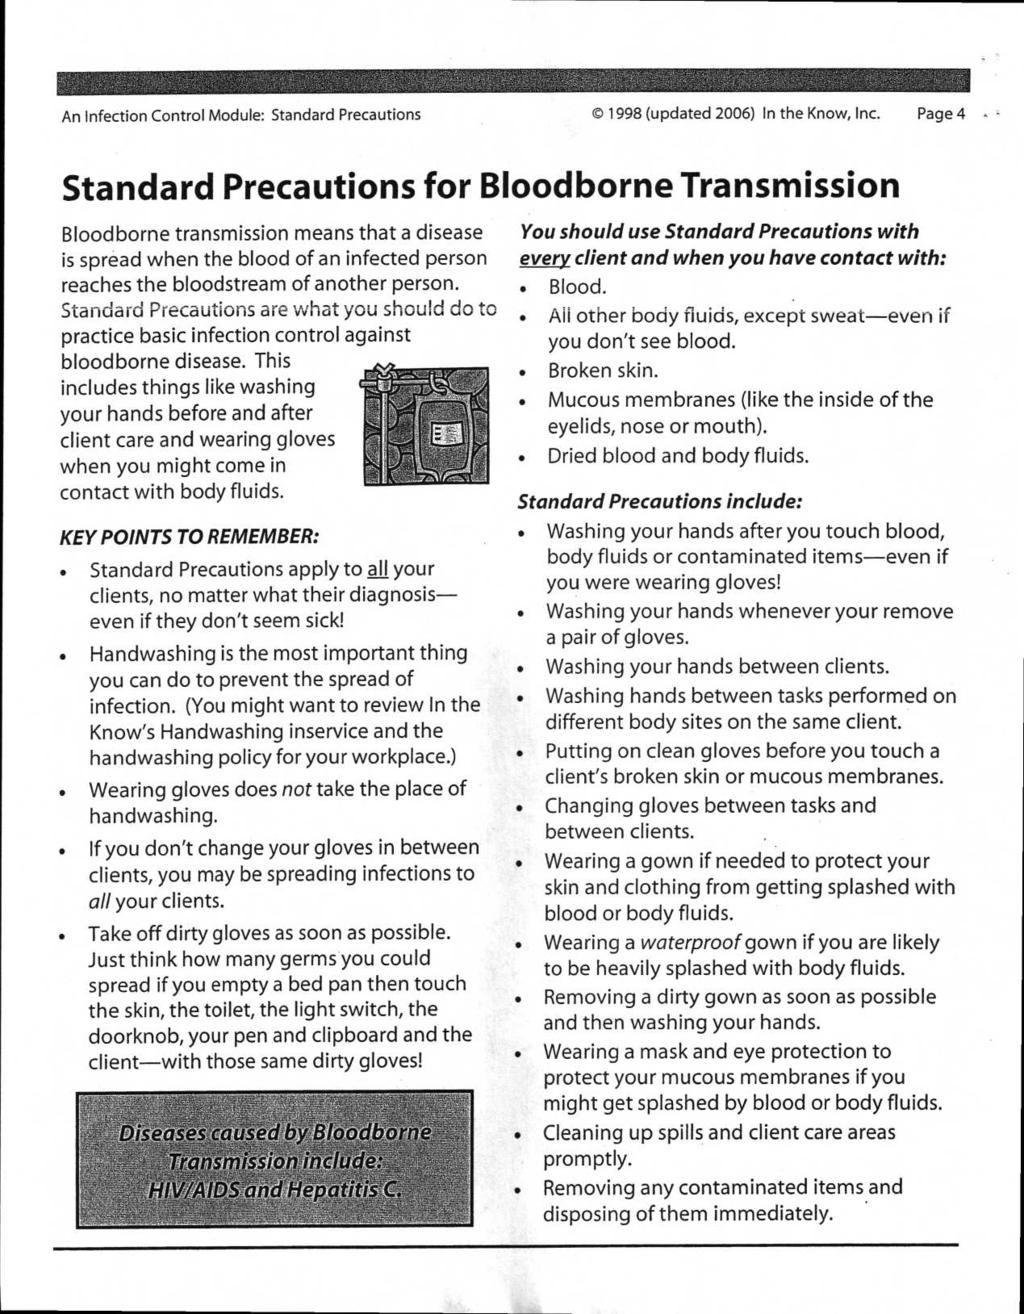 An Infection Control Module: Standard Precautions 1998 (updated 2006) In the Know, Inc.